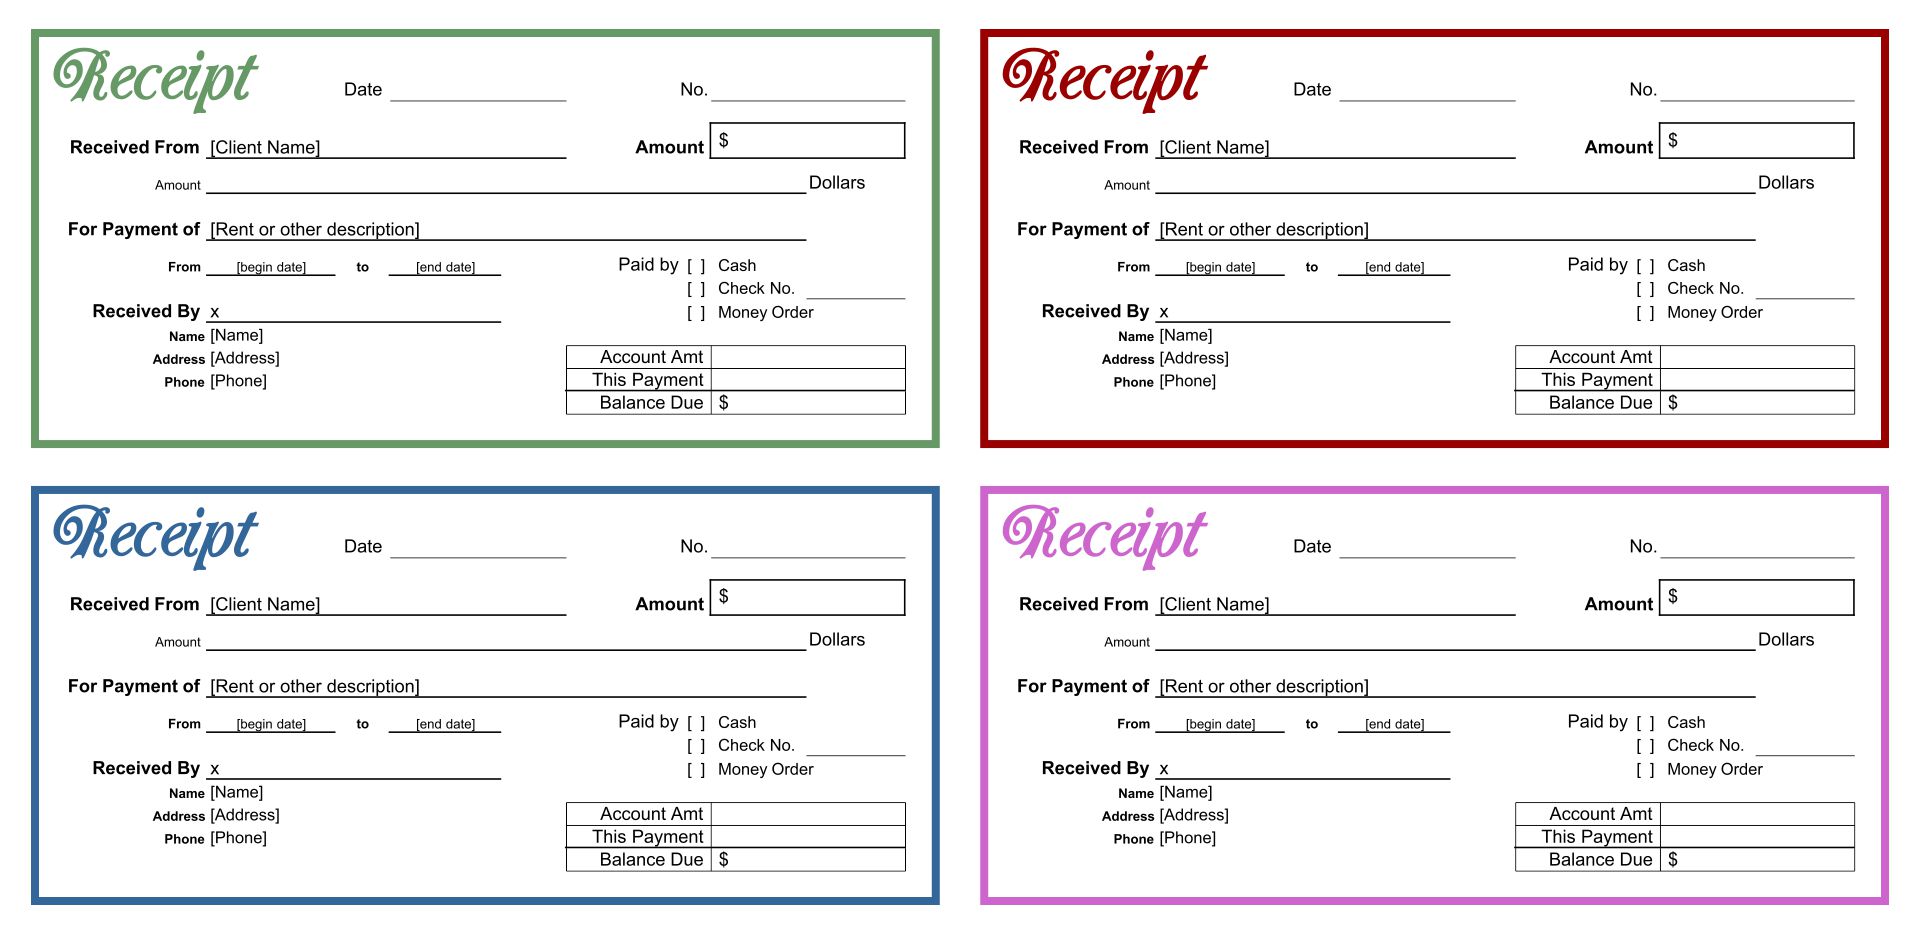 blank-official-receipt-templates-awesome-receipt-forms